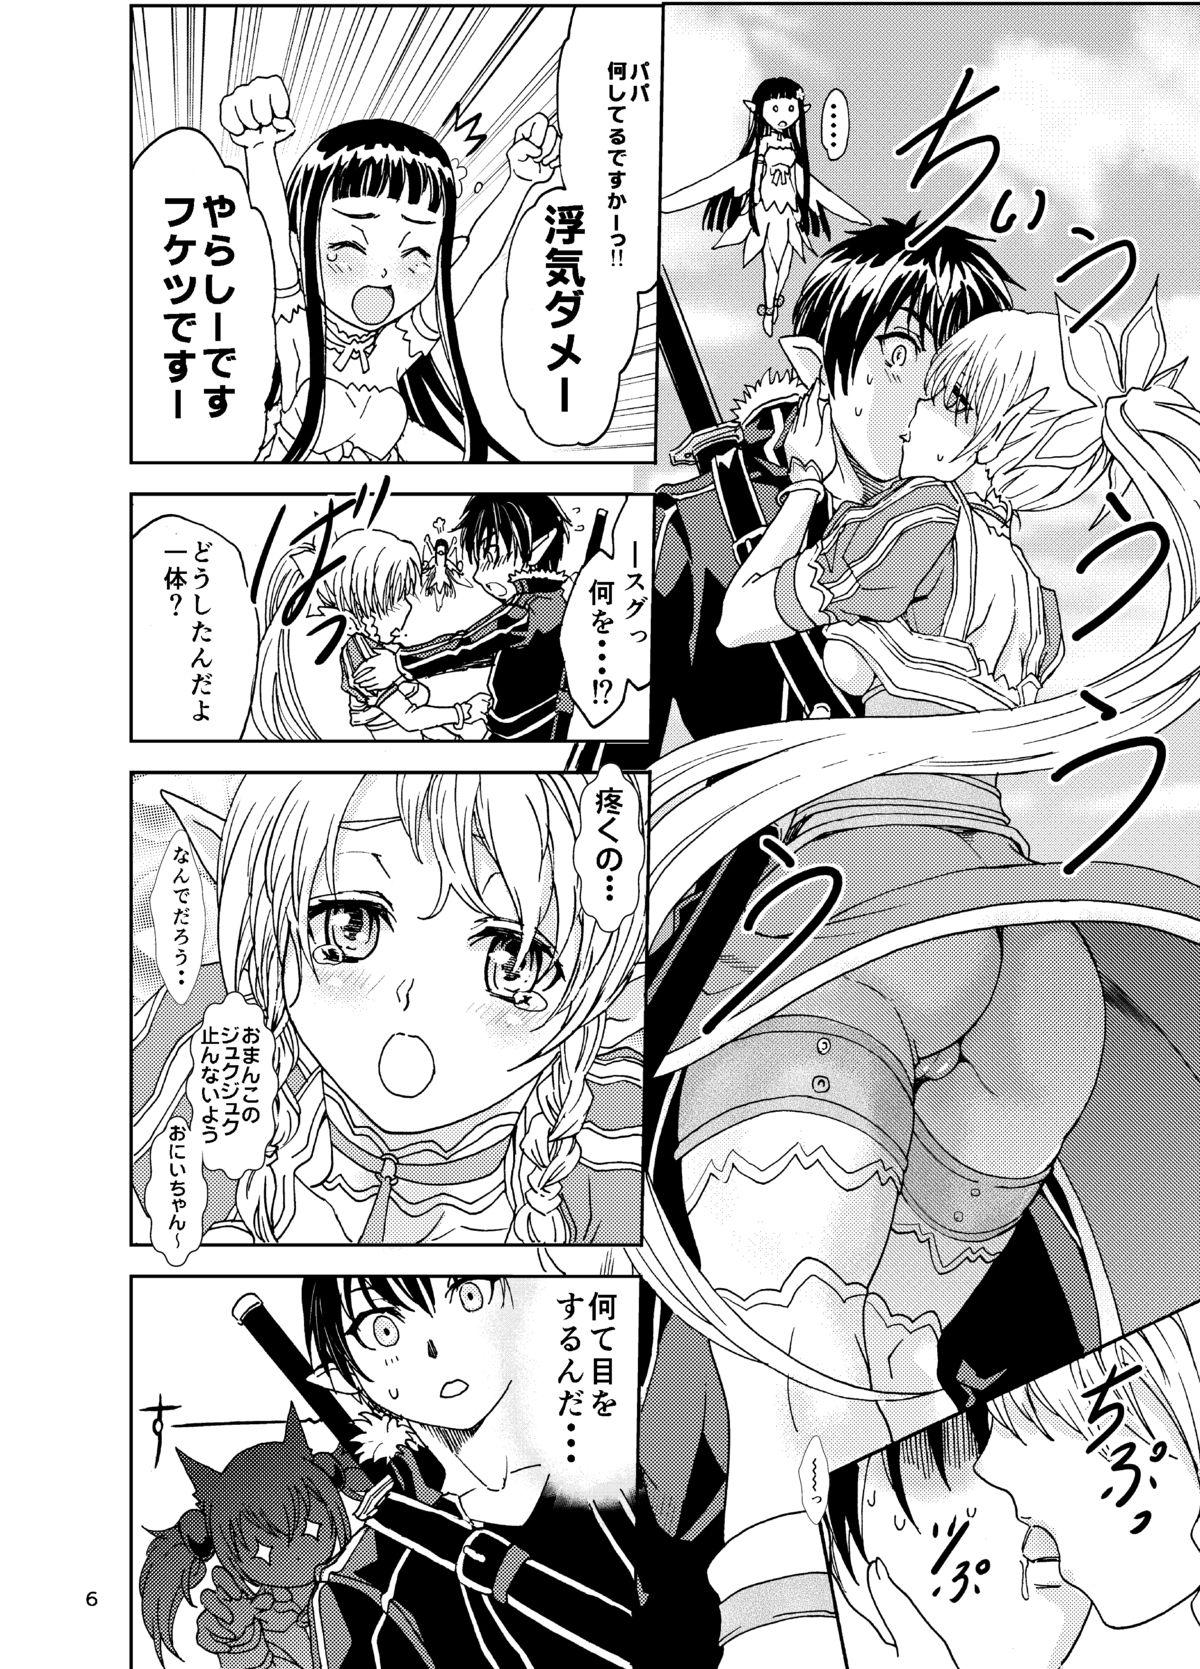 Mexico Kanninn Overflow - Sword art online Pale - Page 6